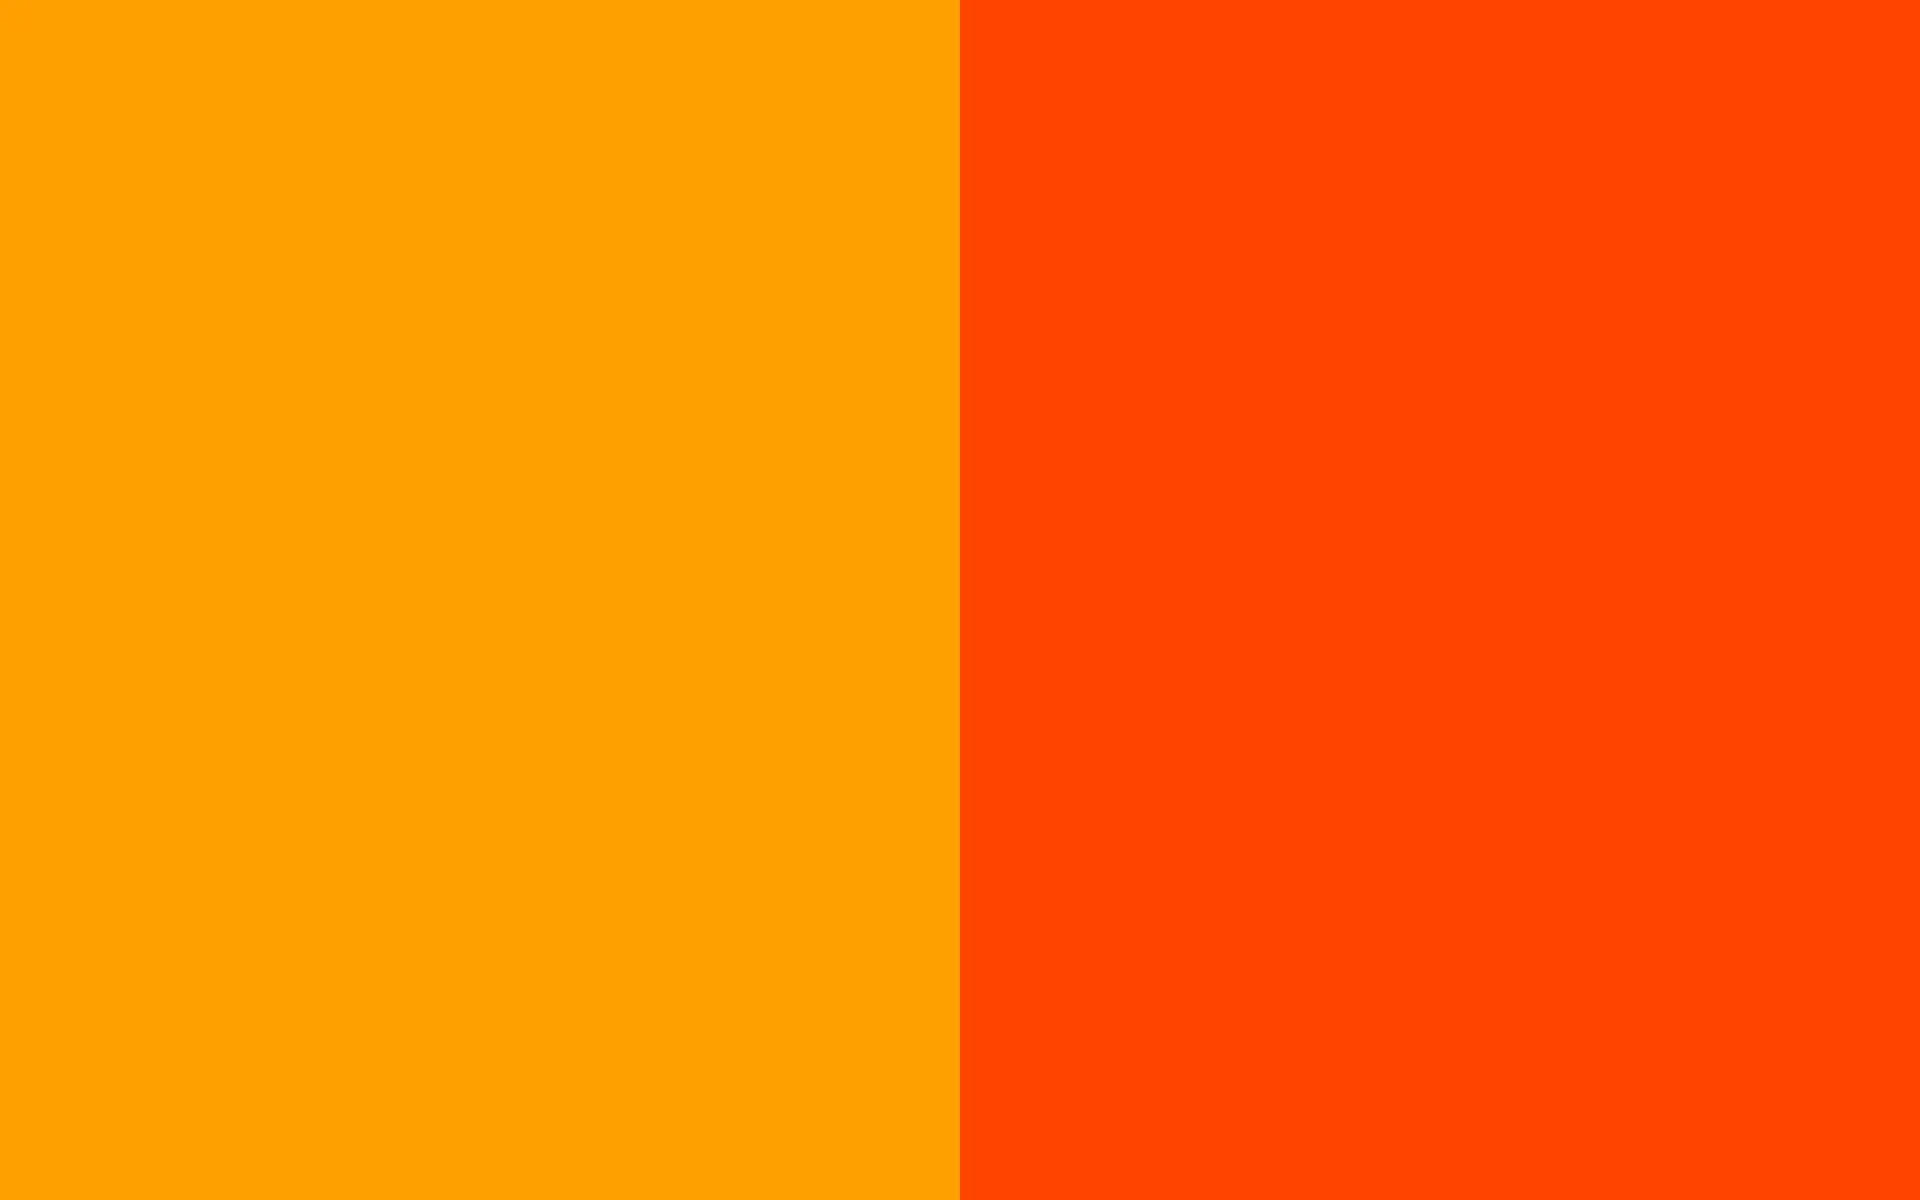 Free resolution Orange Peel and Orange-red solid two color .